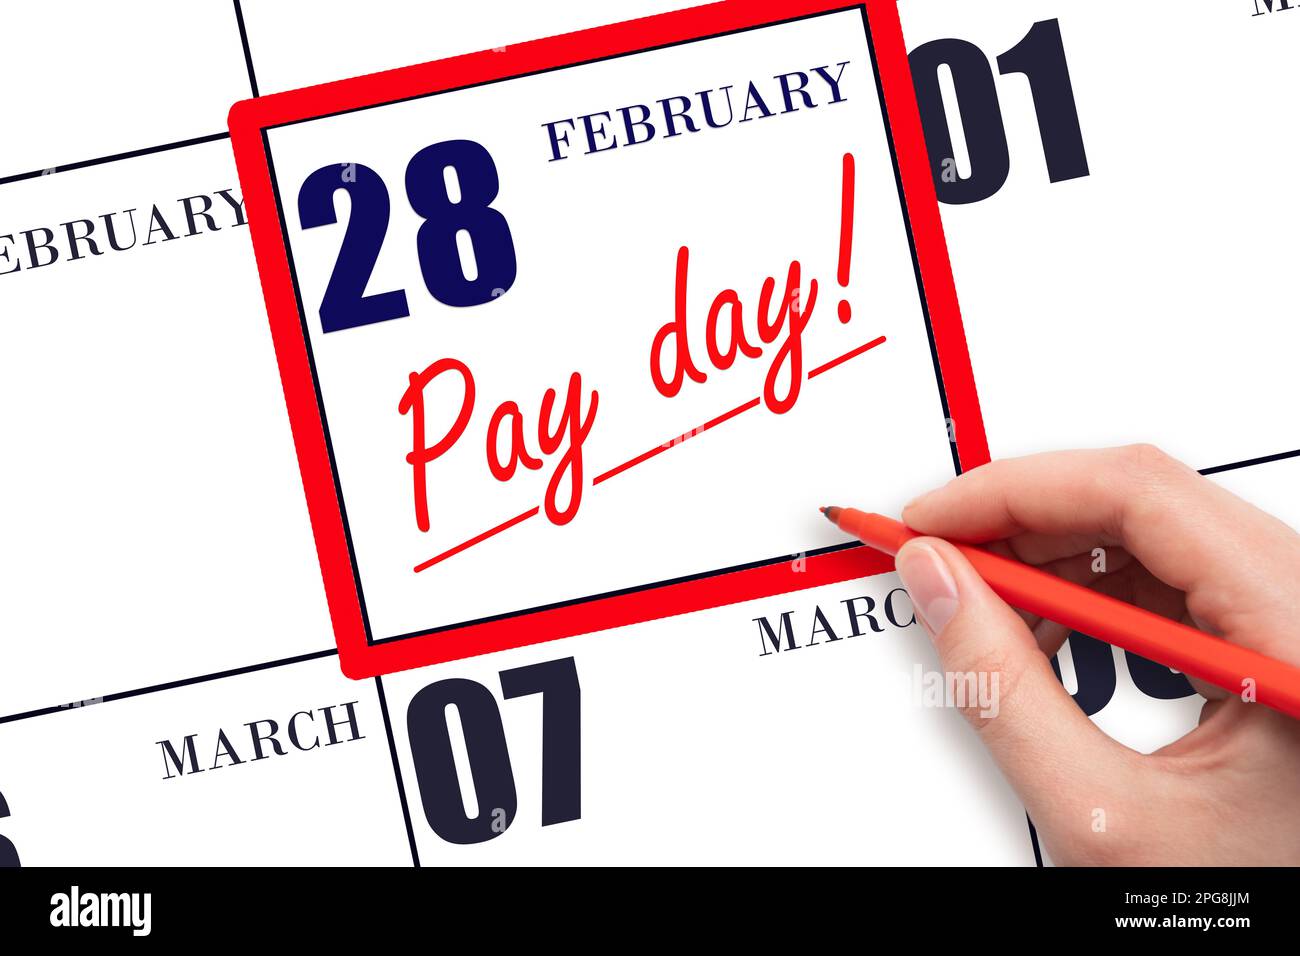 28th day of February. Hand writing text PAY DATE on calendar date February 28 and underline it. Payment due date. Reminder concept of payment. Winter Stock Photo